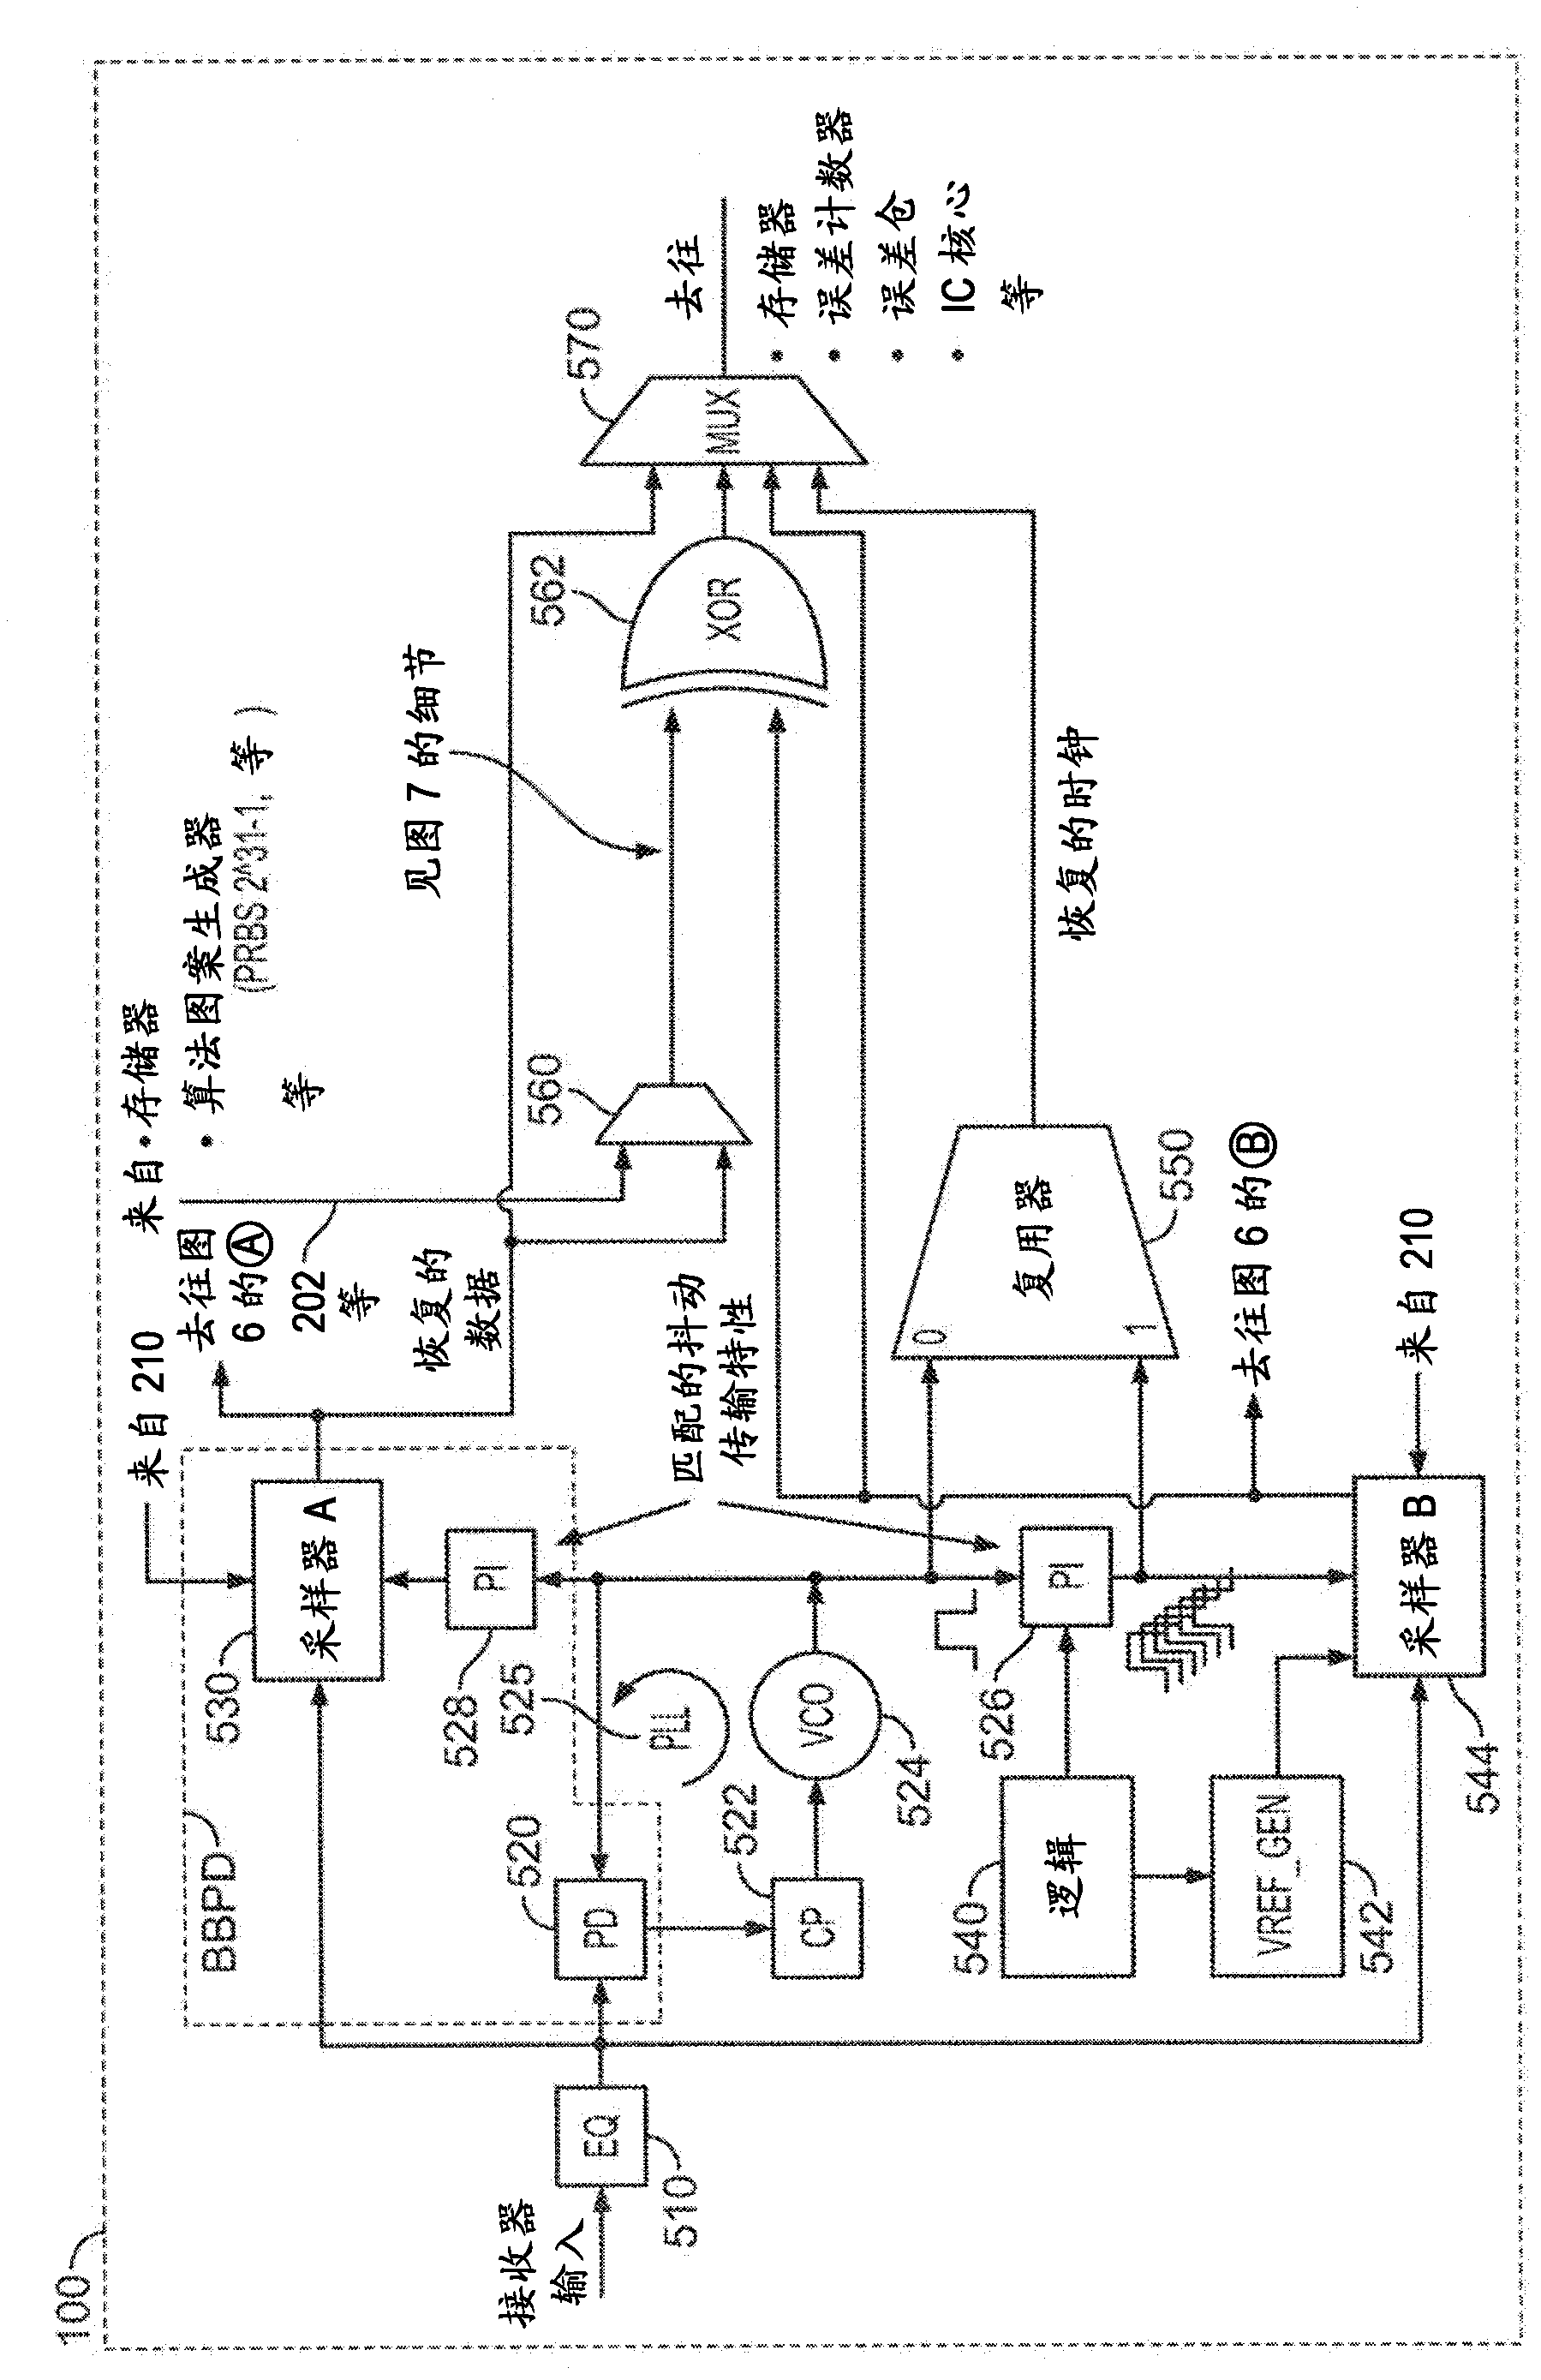 Circuitry on an integrated circuit for performing or facilitating oscilloscope, jitter, and/or bit-error-rate tester operations